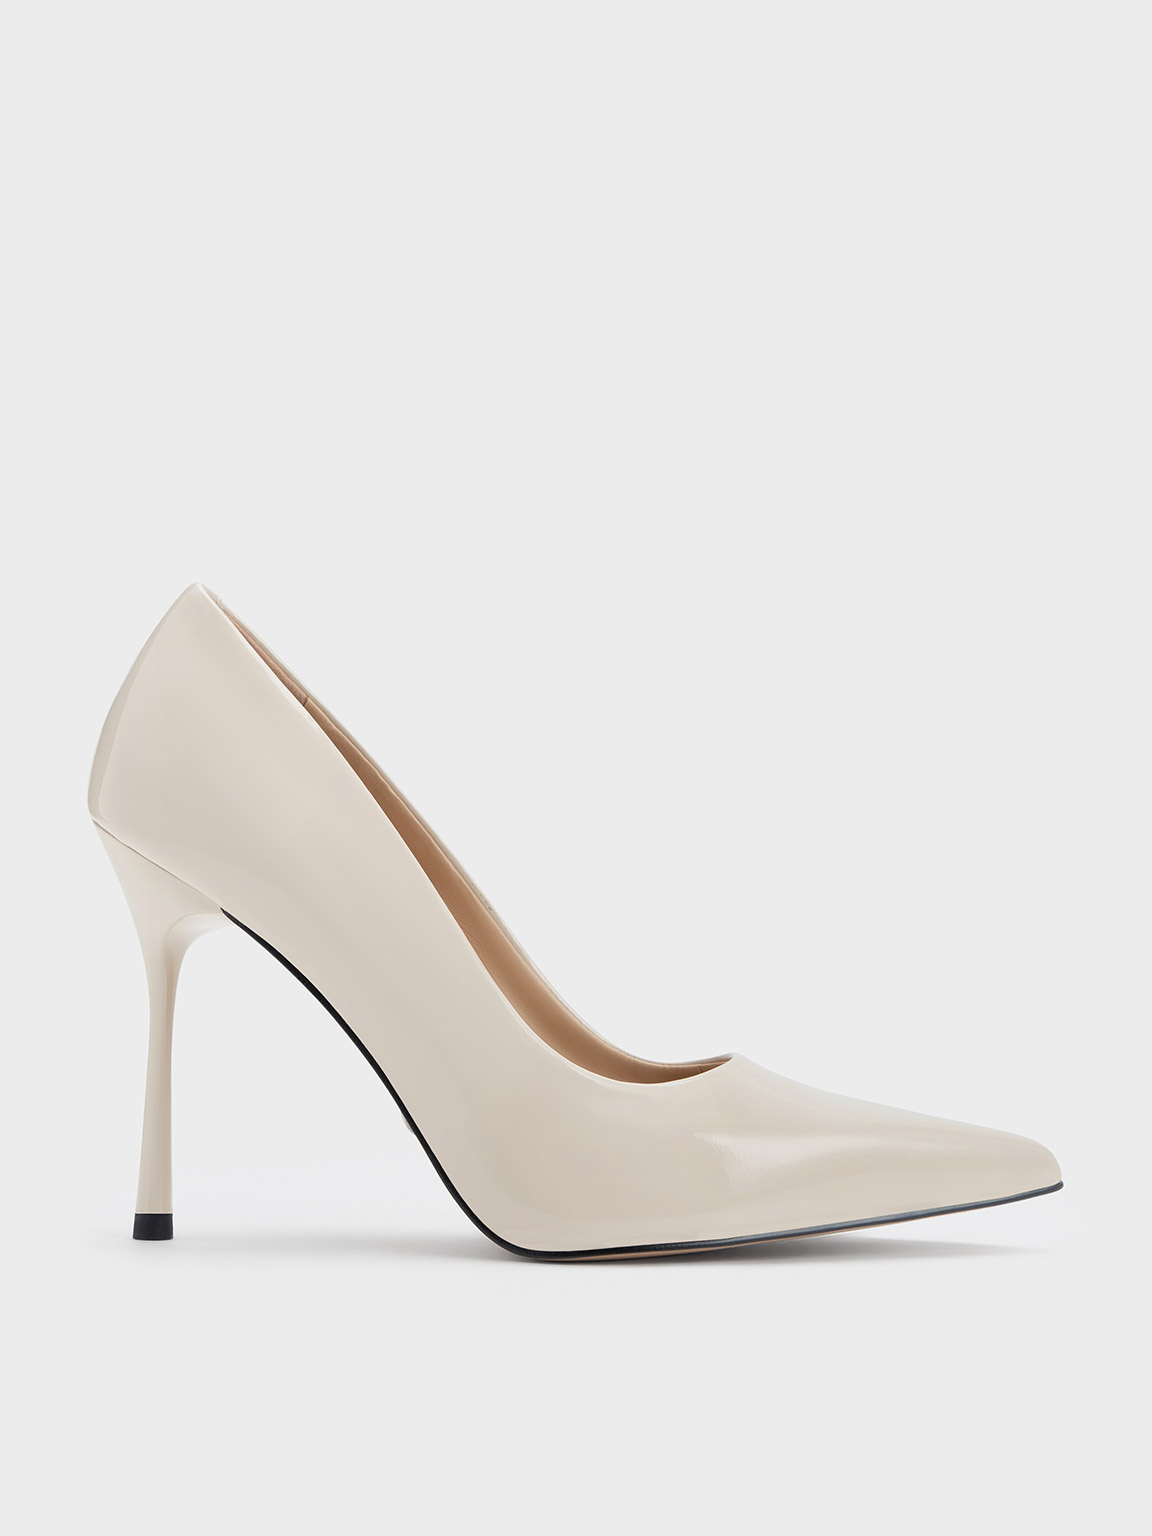 Charles & Keith Kyra Patent Leather Pumps In Chalk